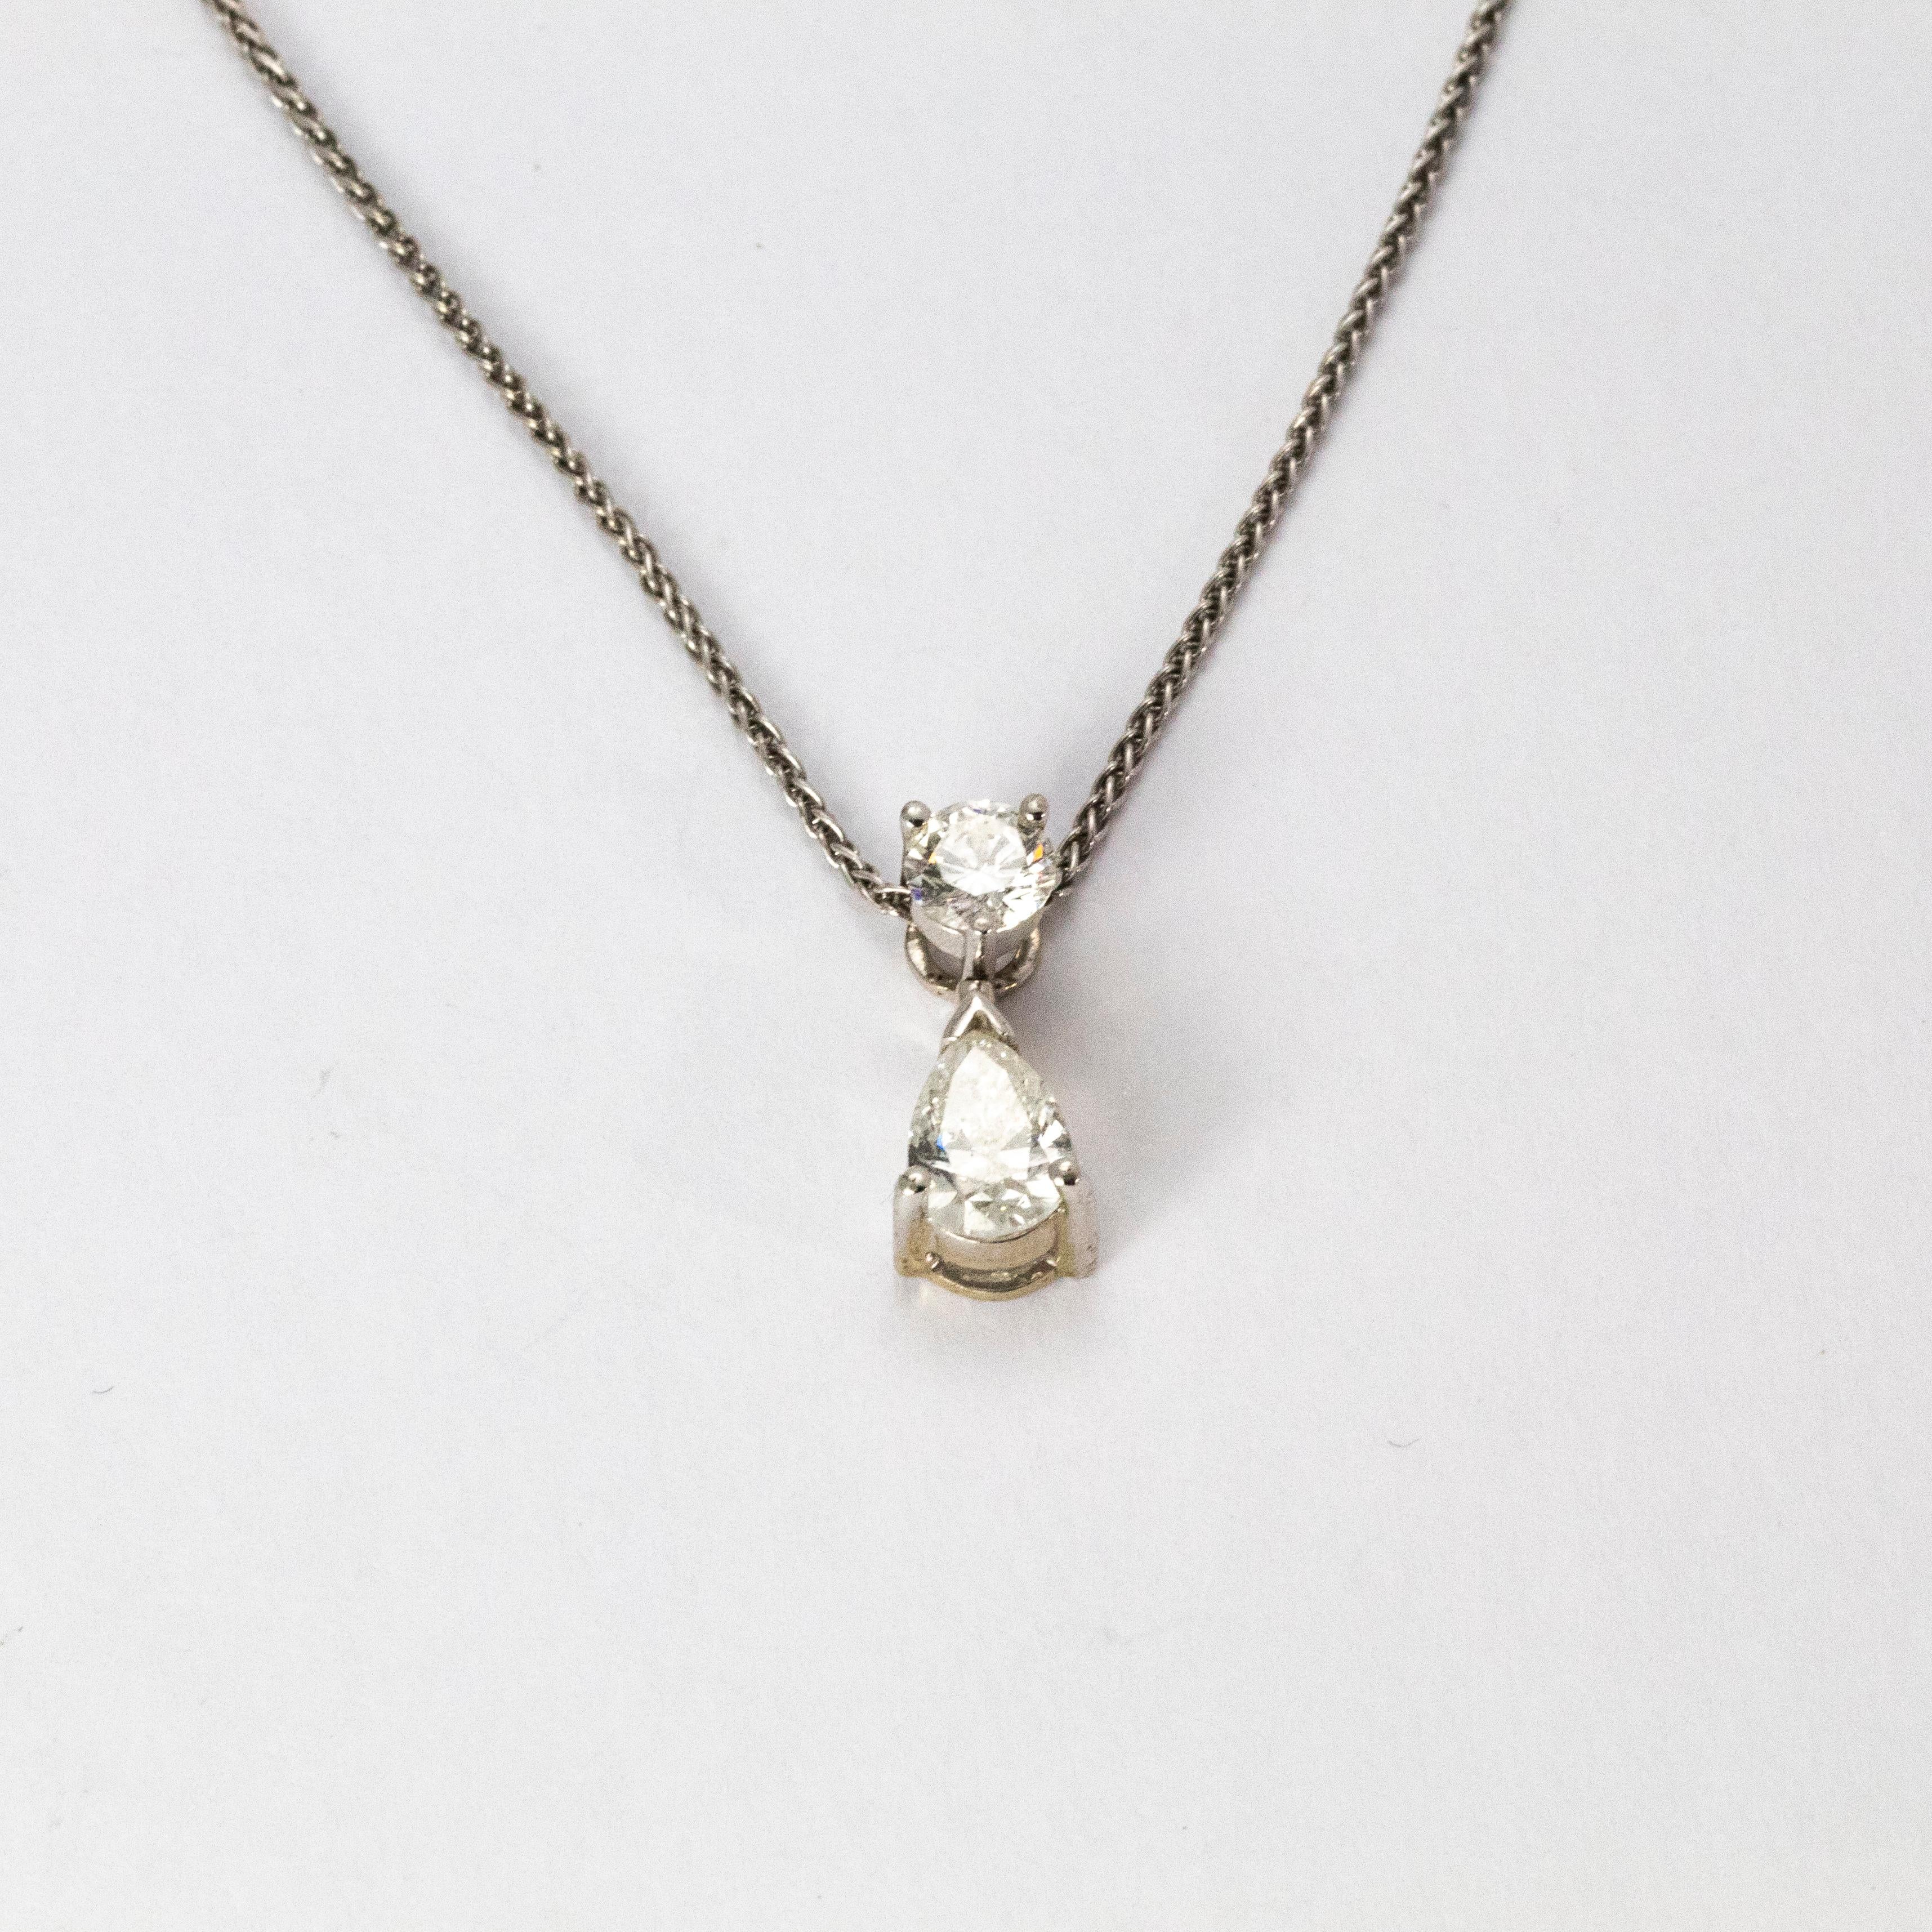 An elegant diamond and white gold necklace from the 1950s, beautifully designed with bright white stones. The first round brilliant cut diamond measures 35 points, hanging from it is an wonderful pear cut diamond measuring 50 points.

Chain length: